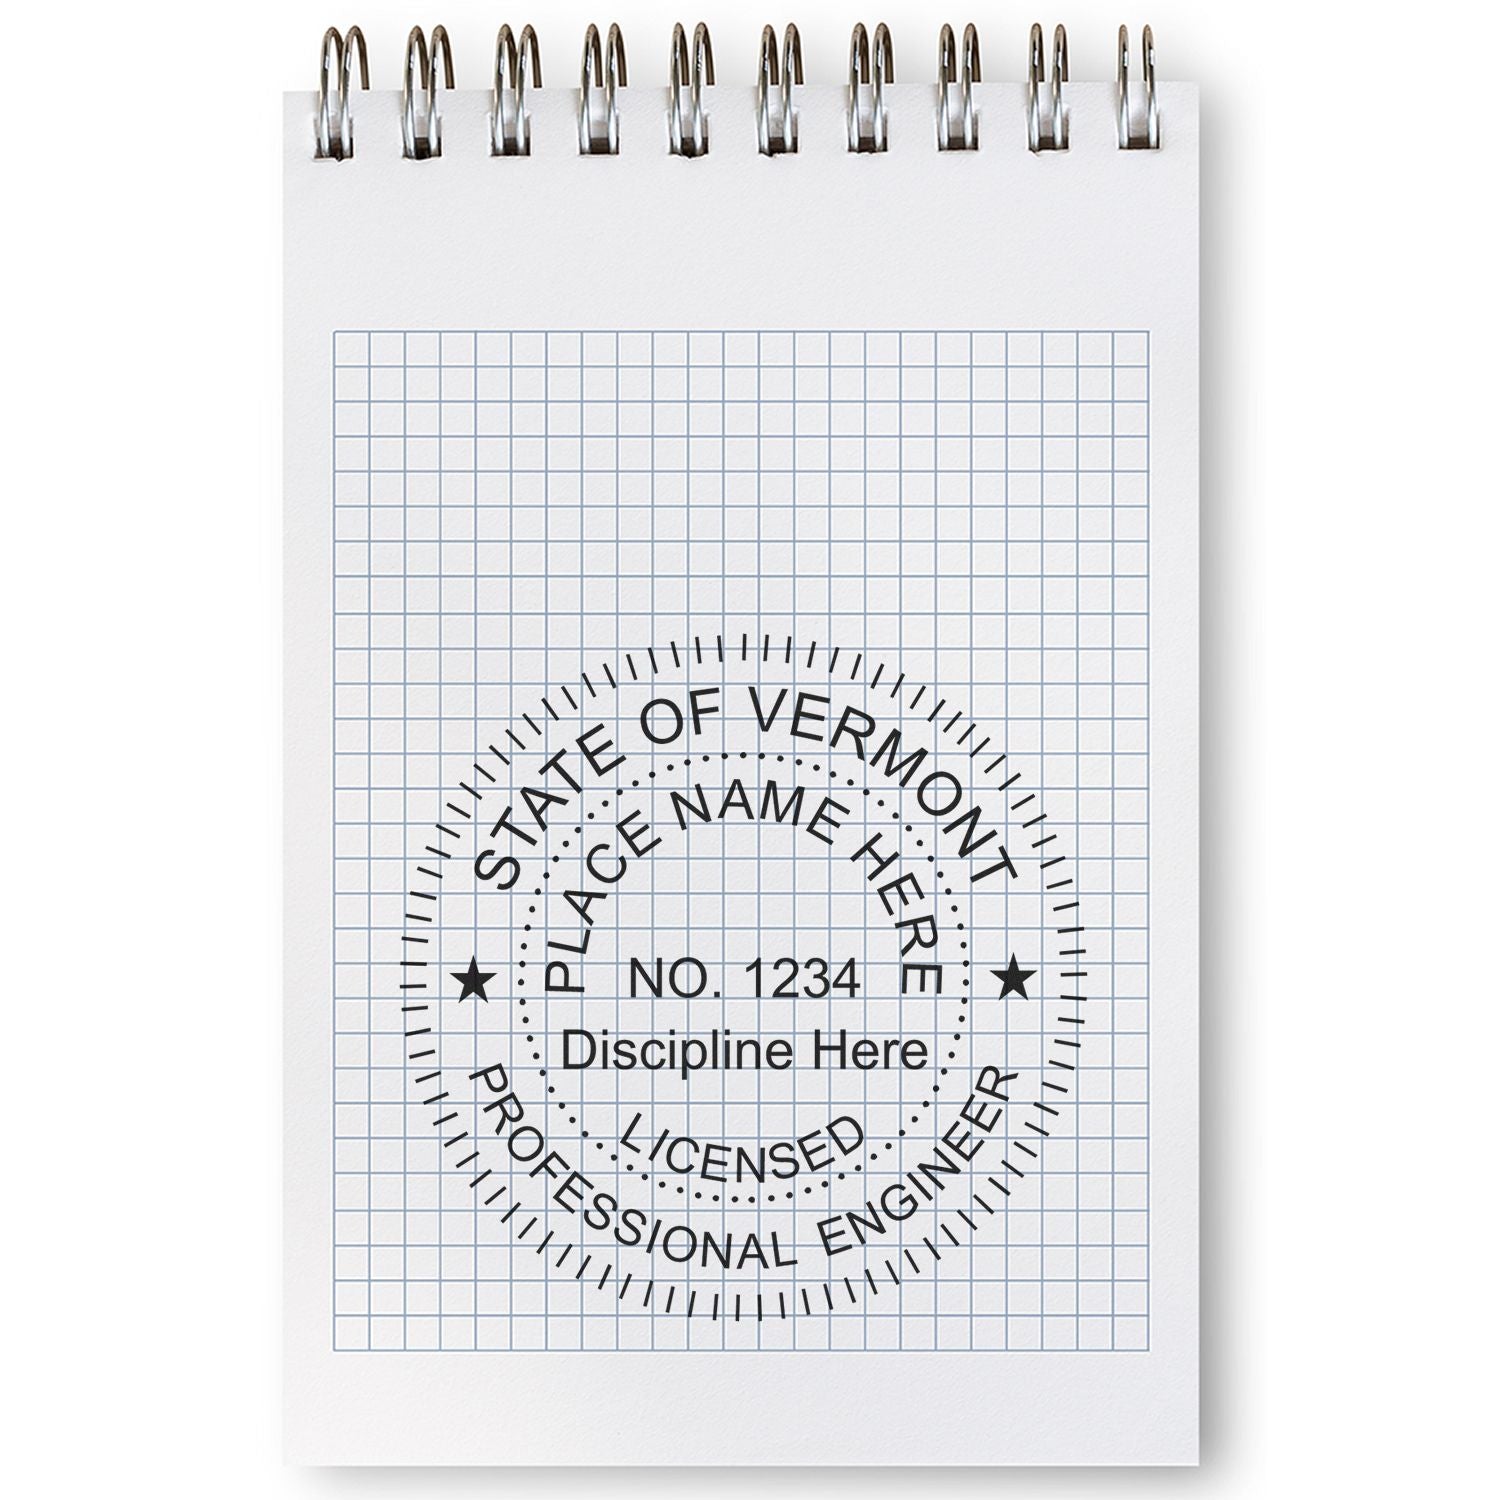 The main image for the Digital Vermont PE Stamp and Electronic Seal for Vermont Engineer depicting a sample of the imprint and electronic files